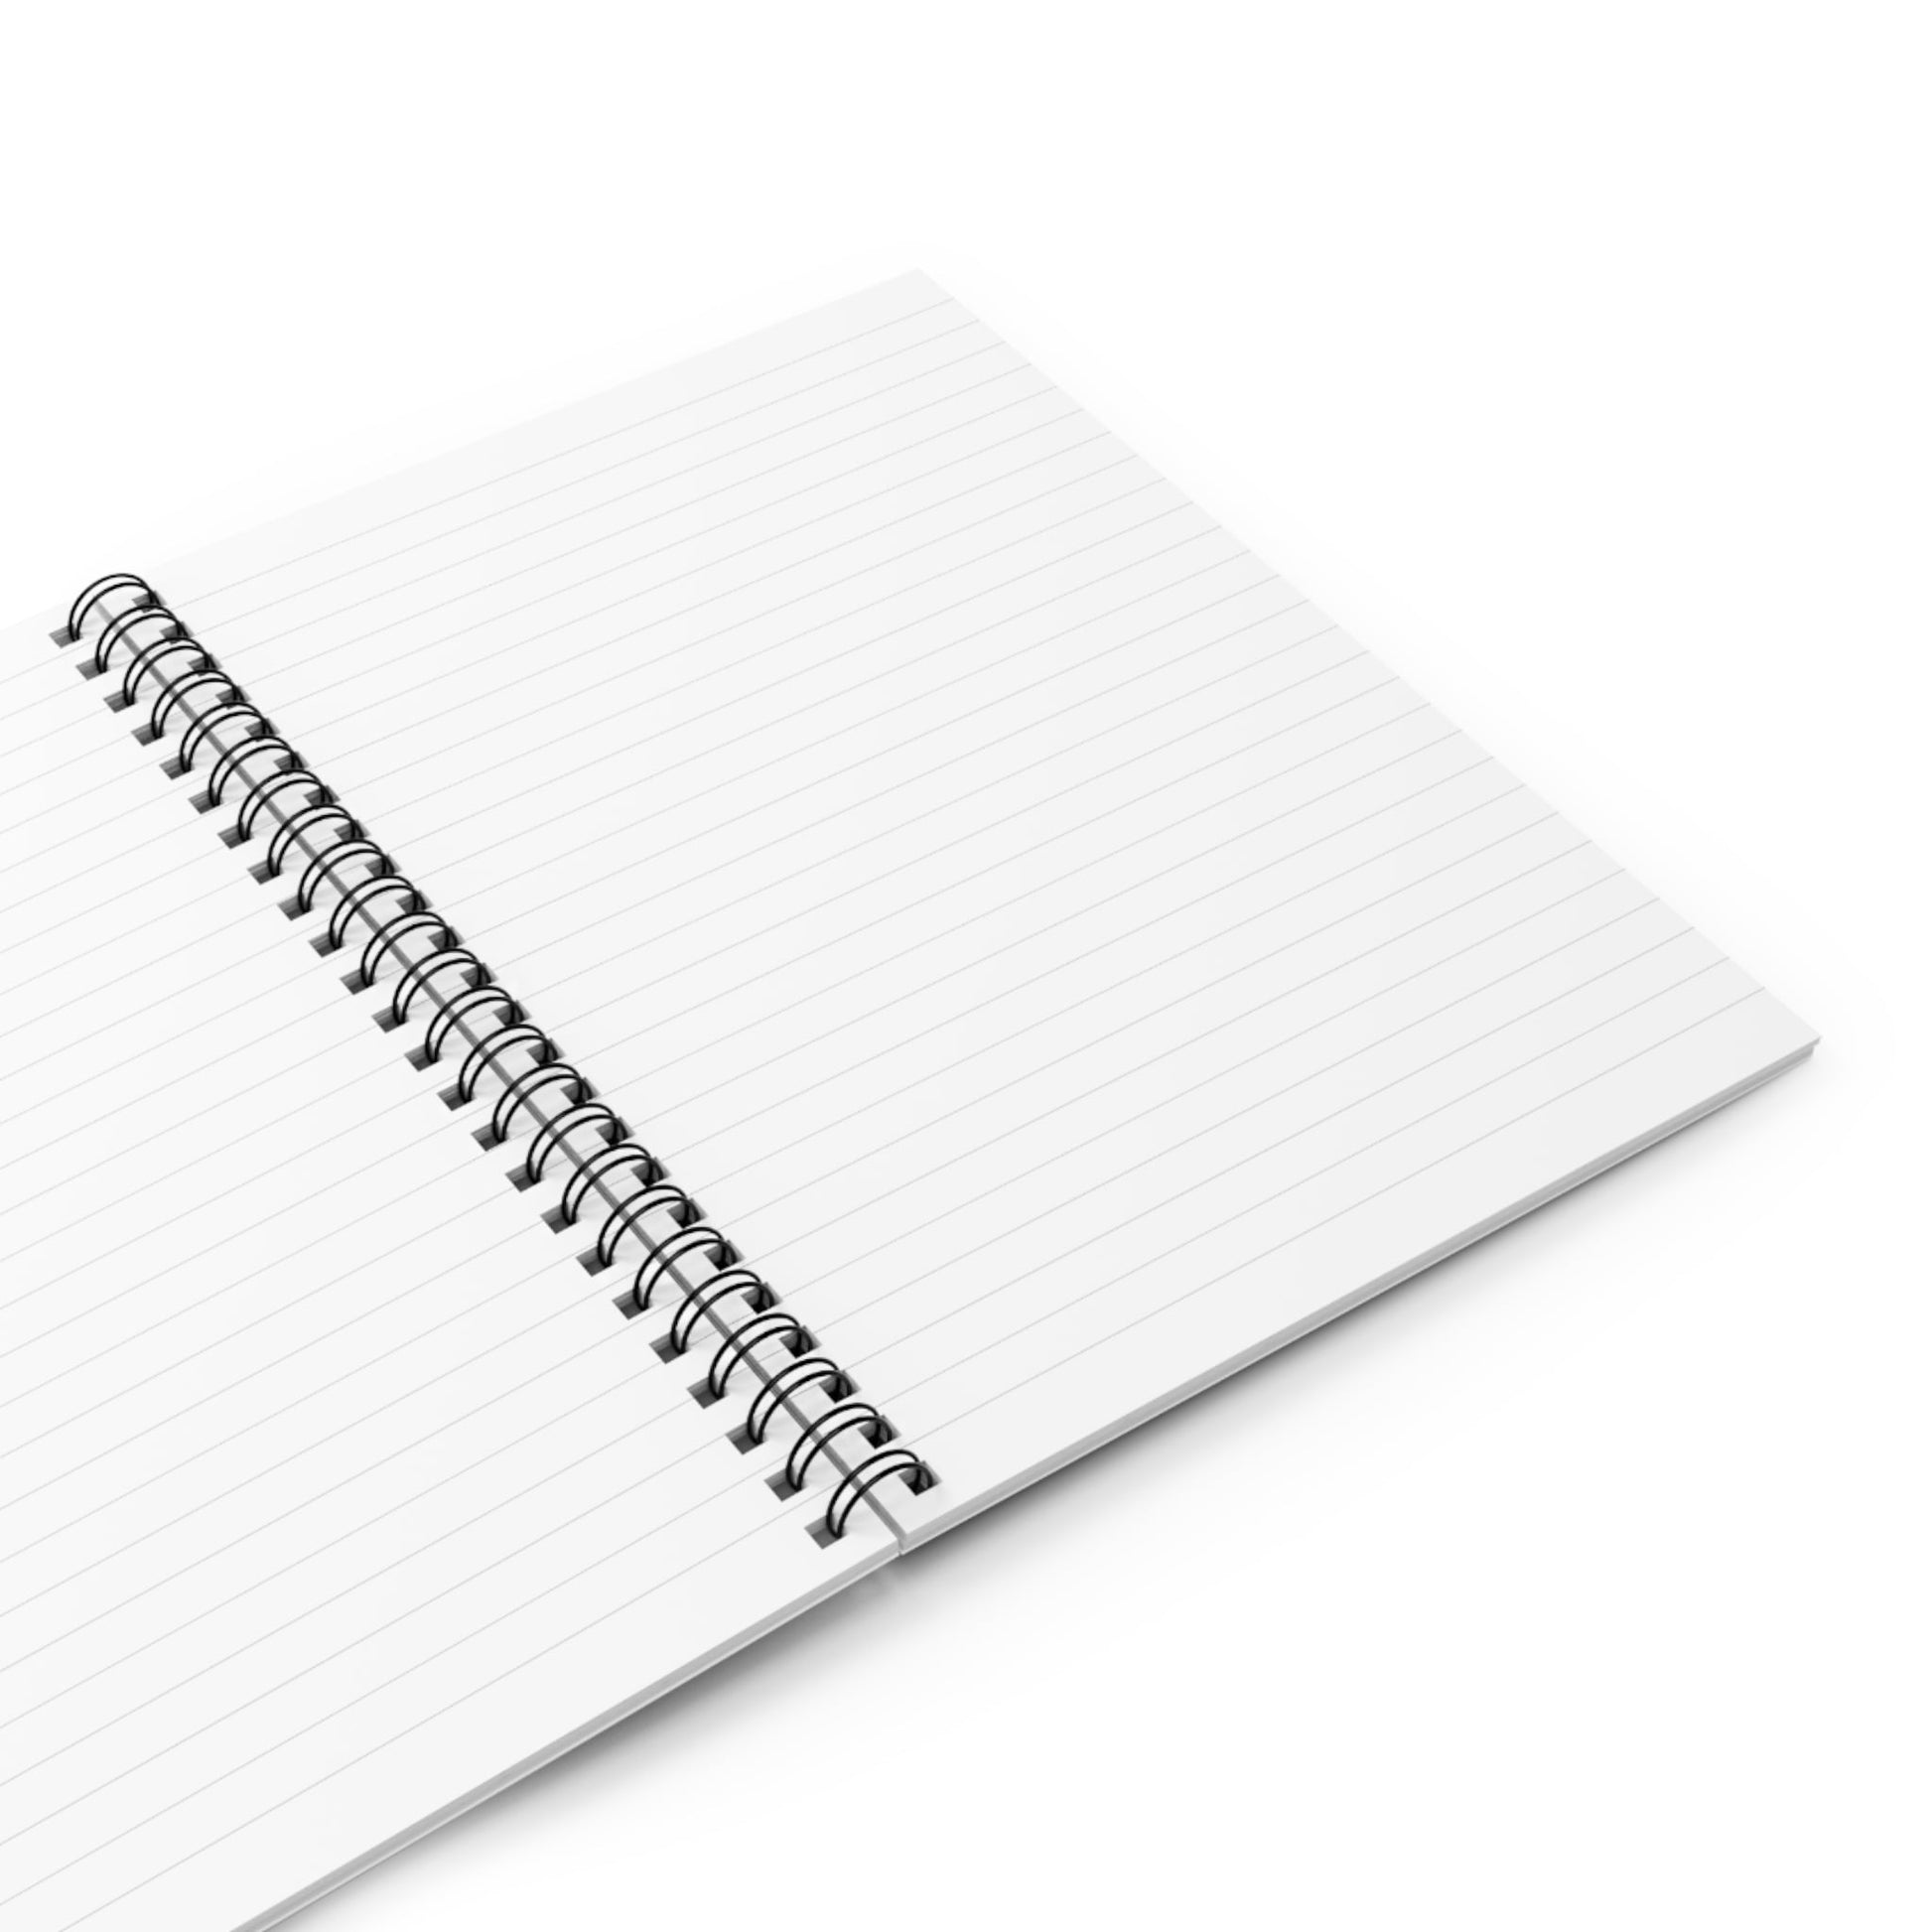 Spiral Notebook with Contemplation Cover Opened with Blank White College Ruled Pages